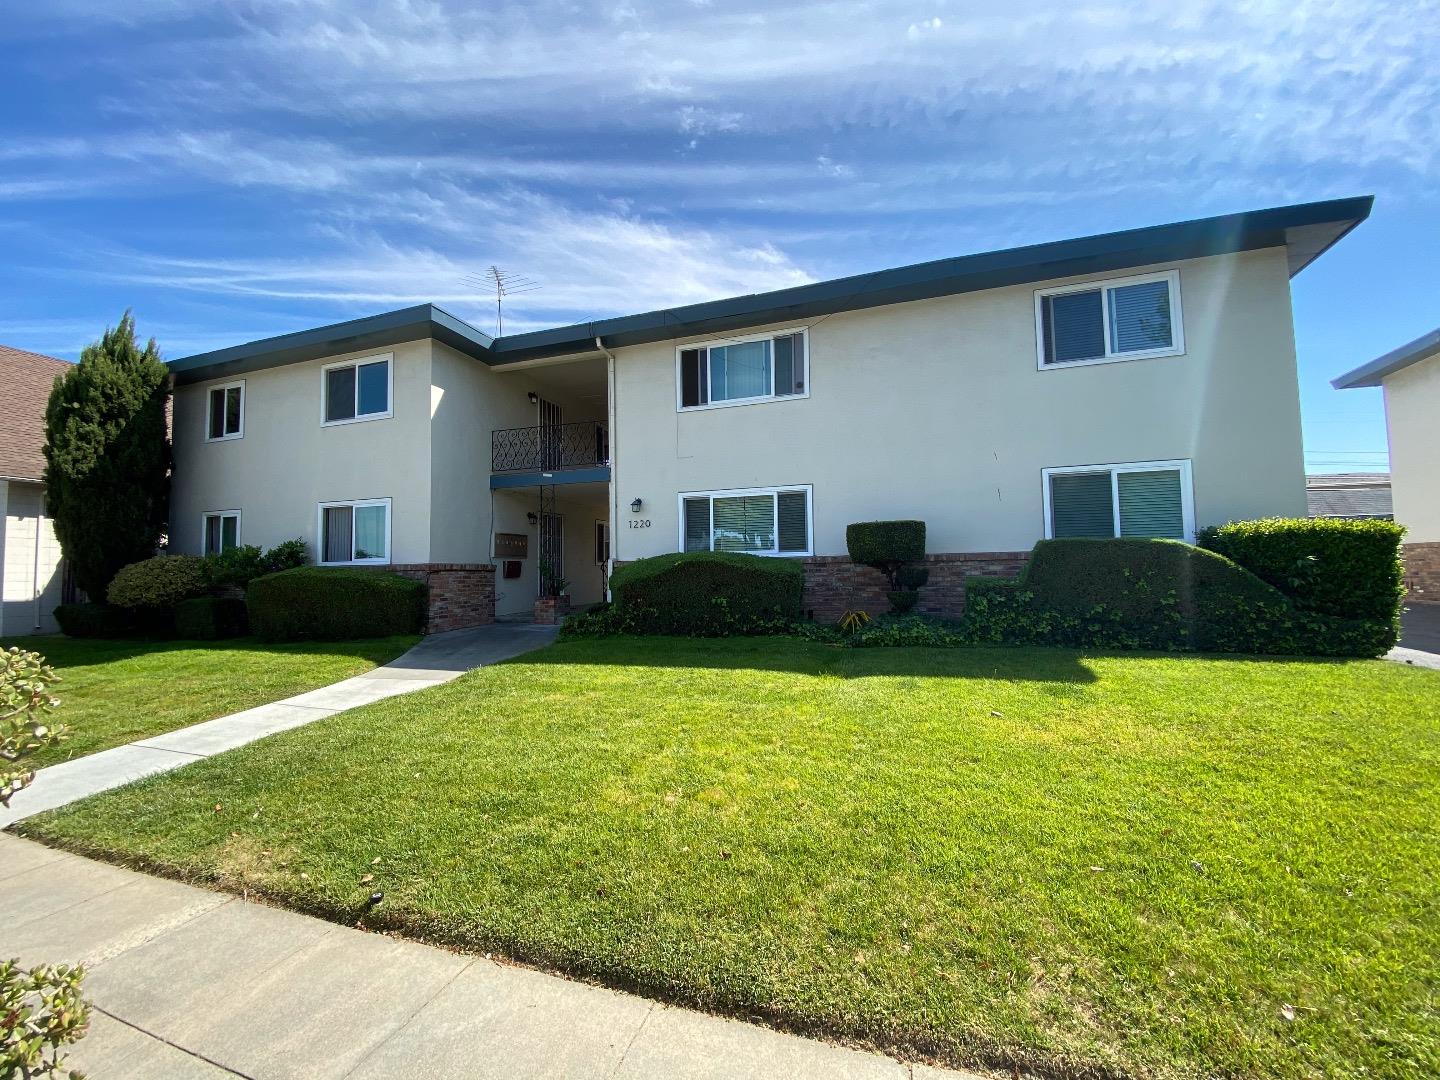 Photo of 1220 Brookfield Ave in Sunnyvale, CA